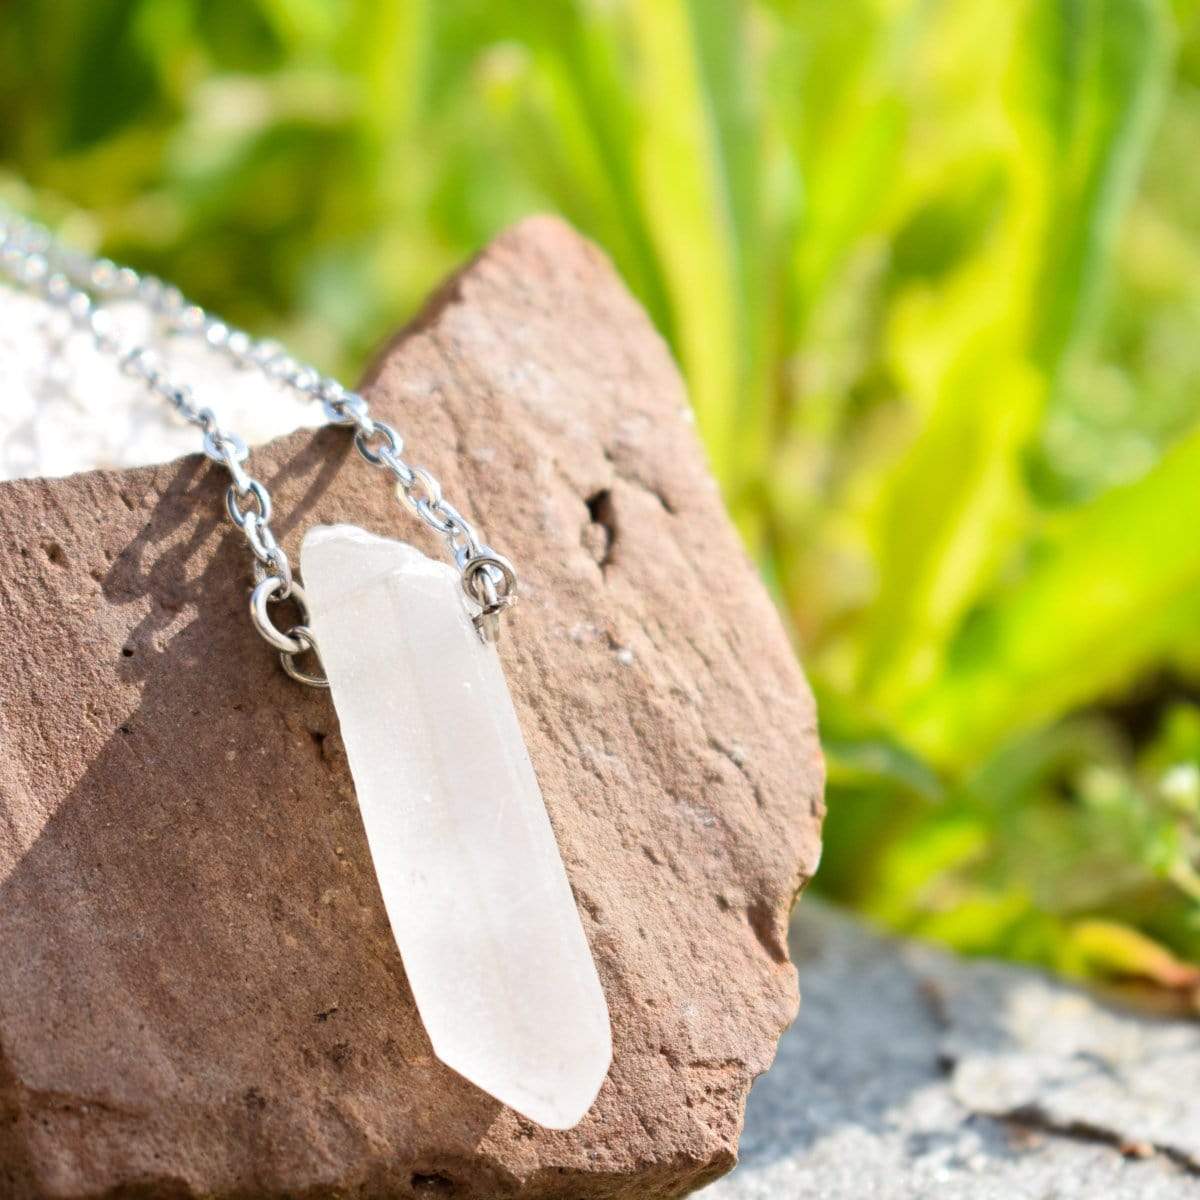 Clear Quartz Necklace, Wire Wrapped Crystal, Calming Healing Stone,  Handmade Gift for April Aries, Custom Design Pendant for Him Her - Etsy |  Handmade crystal necklace, Raw crystal necklace, Quartz crystal necklace